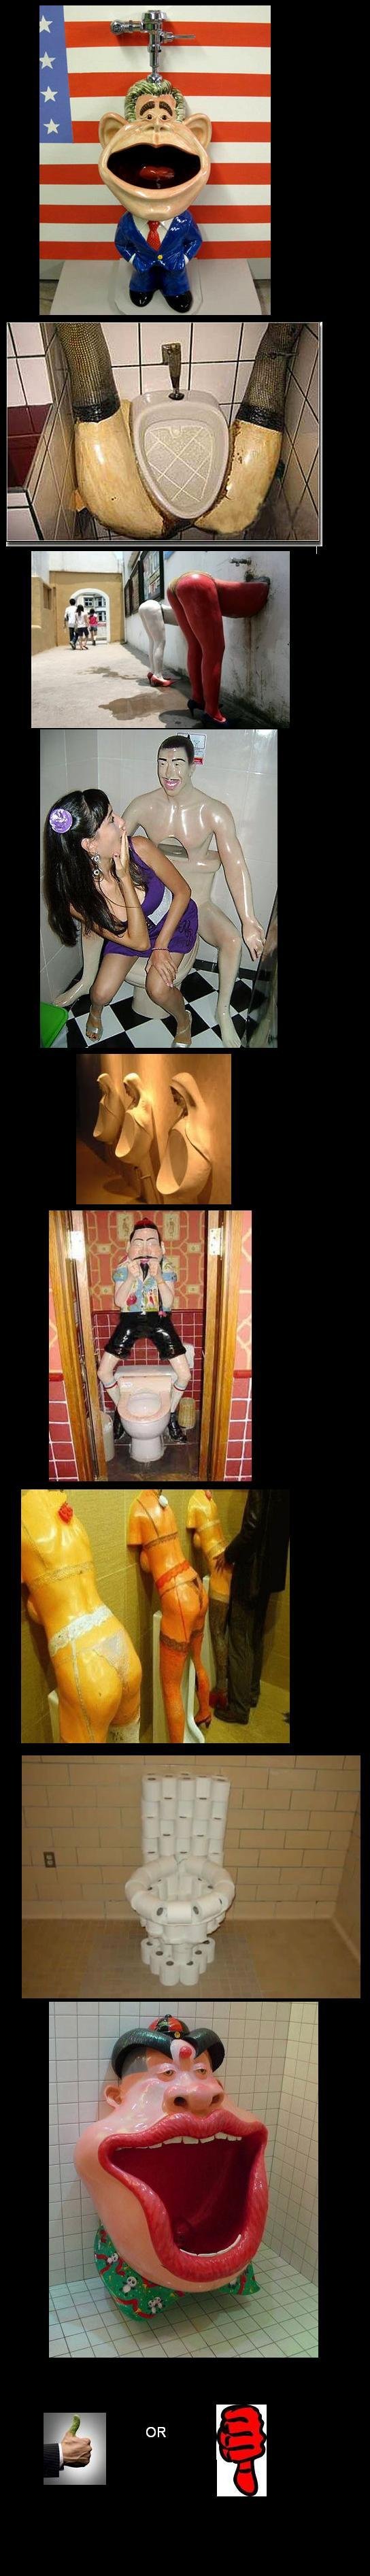 weird toilets and sinks. found and compiled not made. moar?.